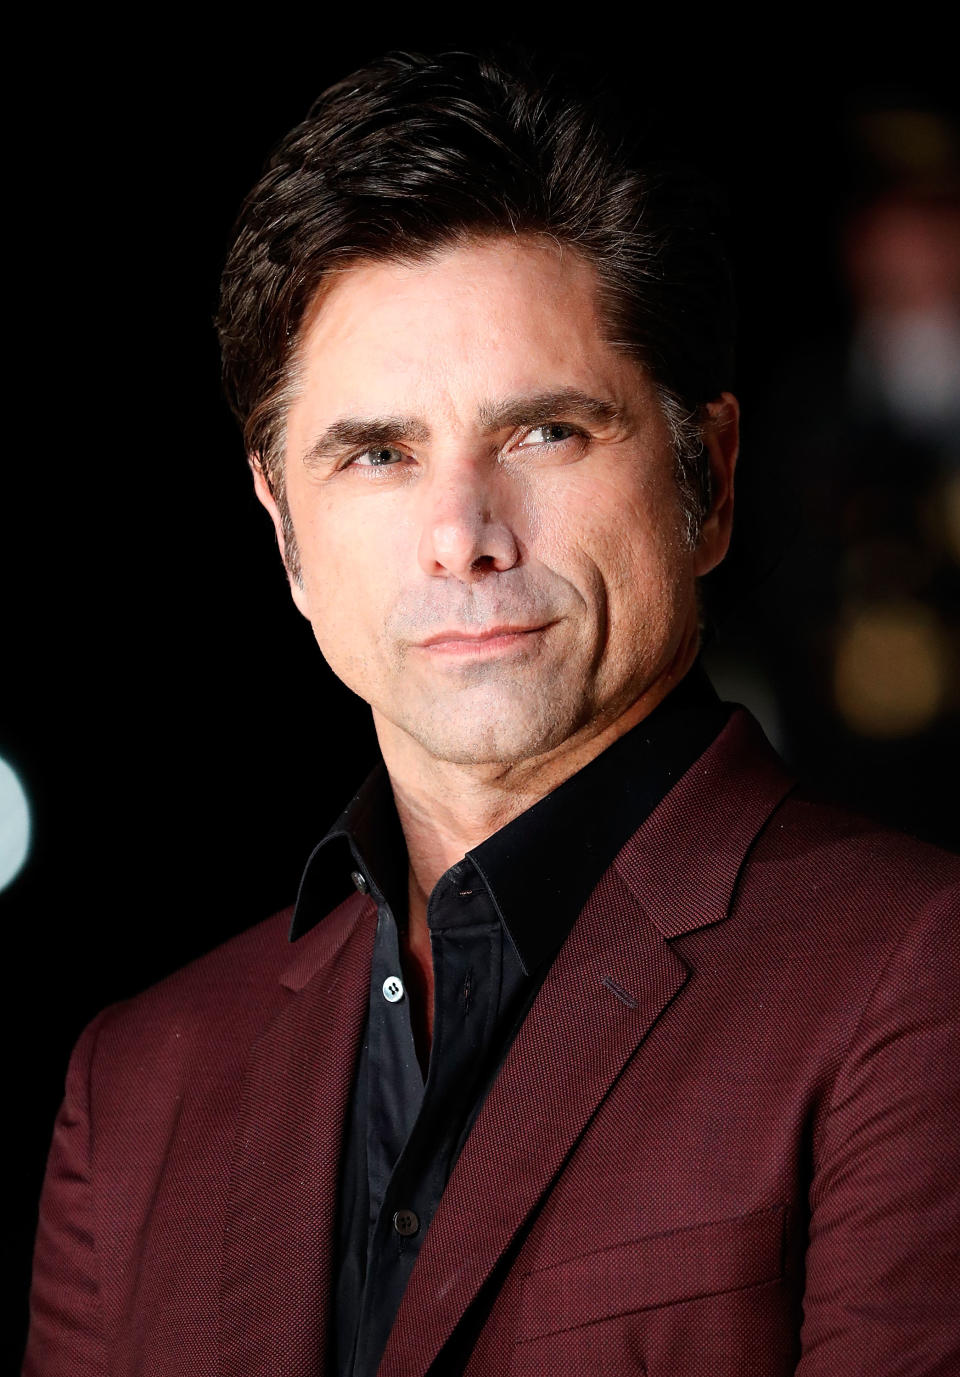 John Stamos and wife Caitlin McHugh welcomed son Billy in April. (Photo: Paul Morigi/Getty Images for Capital Concerts Inc.)